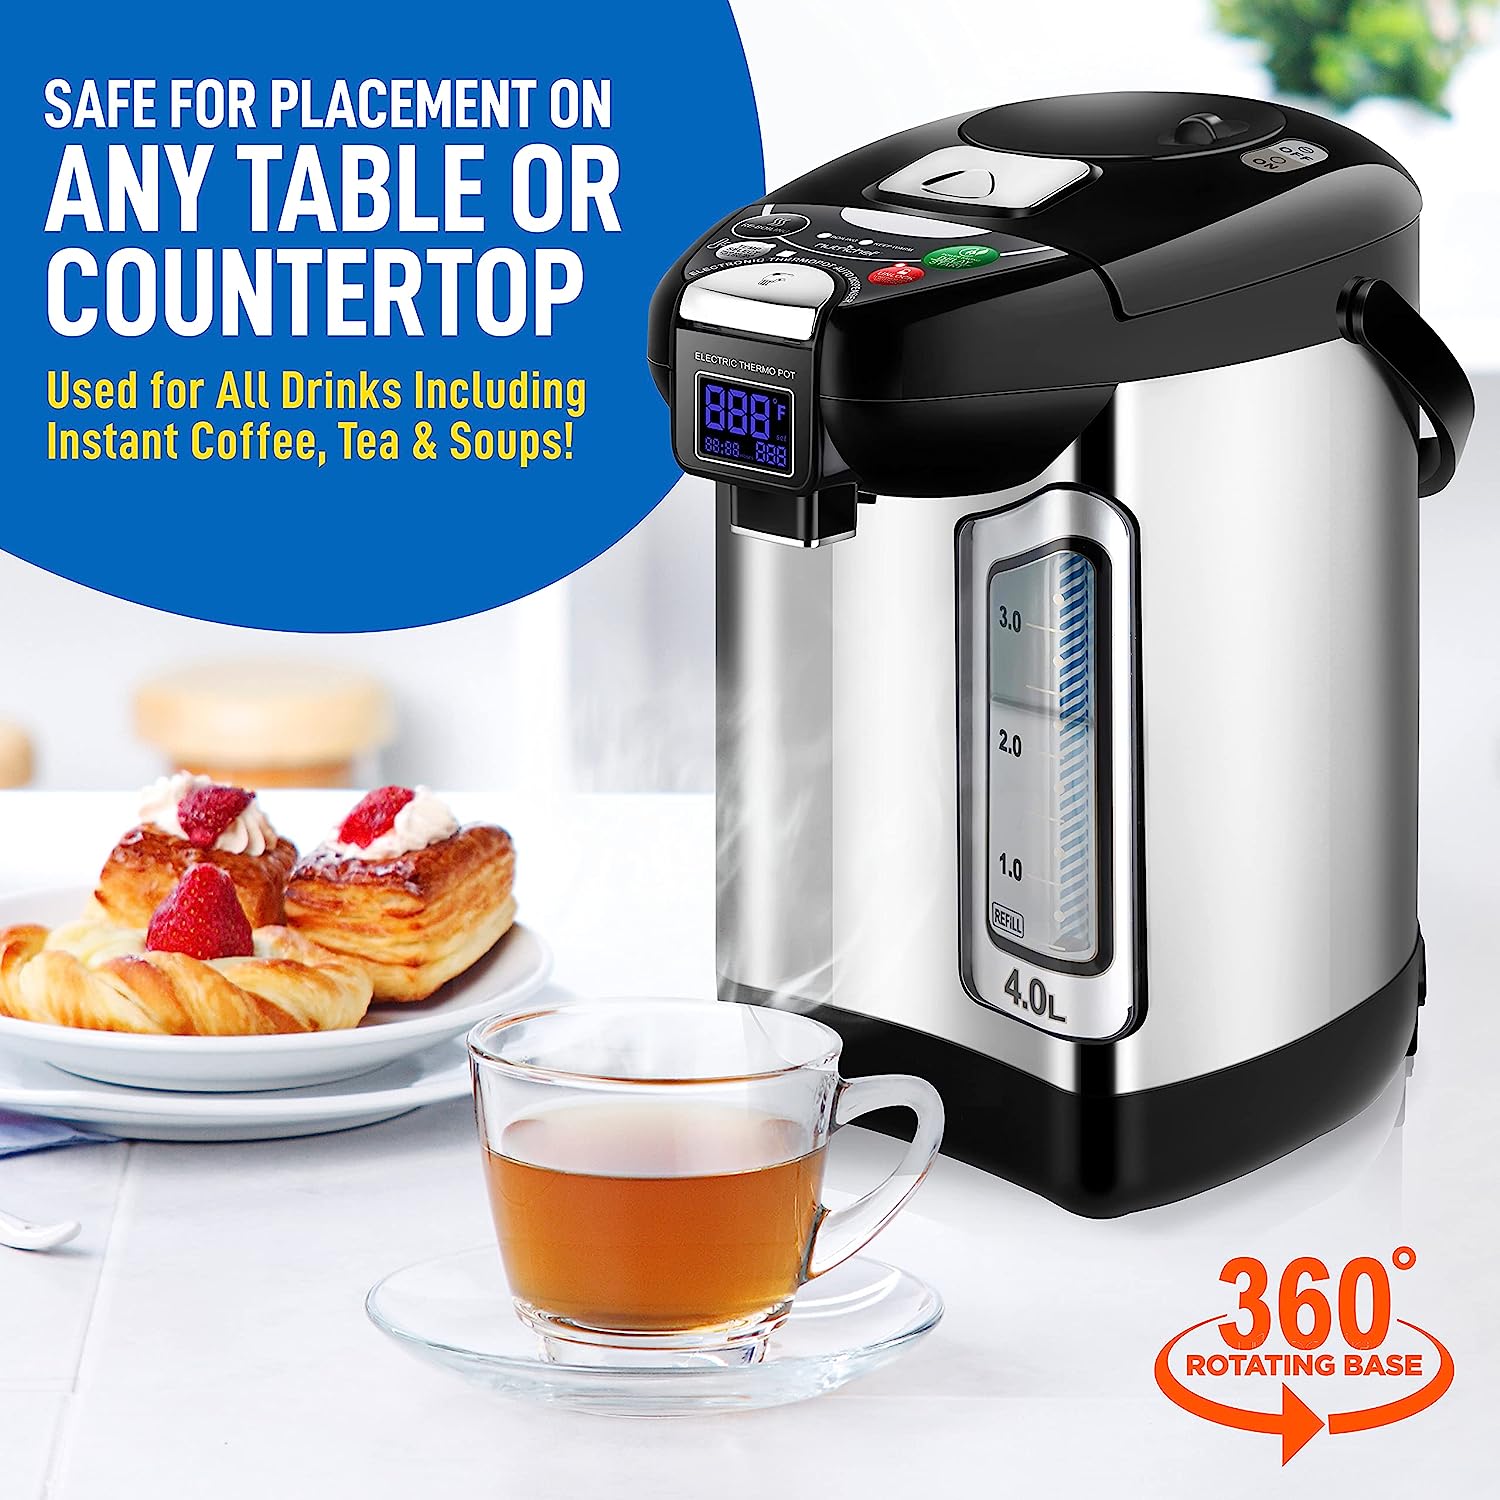 https://bigbigmart.com/wp-content/uploads/2023/07/NutriChef-Digital-Water-Boiler-and-Warmer-4L-4.23-Qt-Stainless-Electric-Hot-Water-Dispenser-w-LCD-Display-Rotating-Base-Keep-Warm-Auto-Shut-Off-Safety-Lock-Instant-Heating-for-Coffee-Tea3.jpg